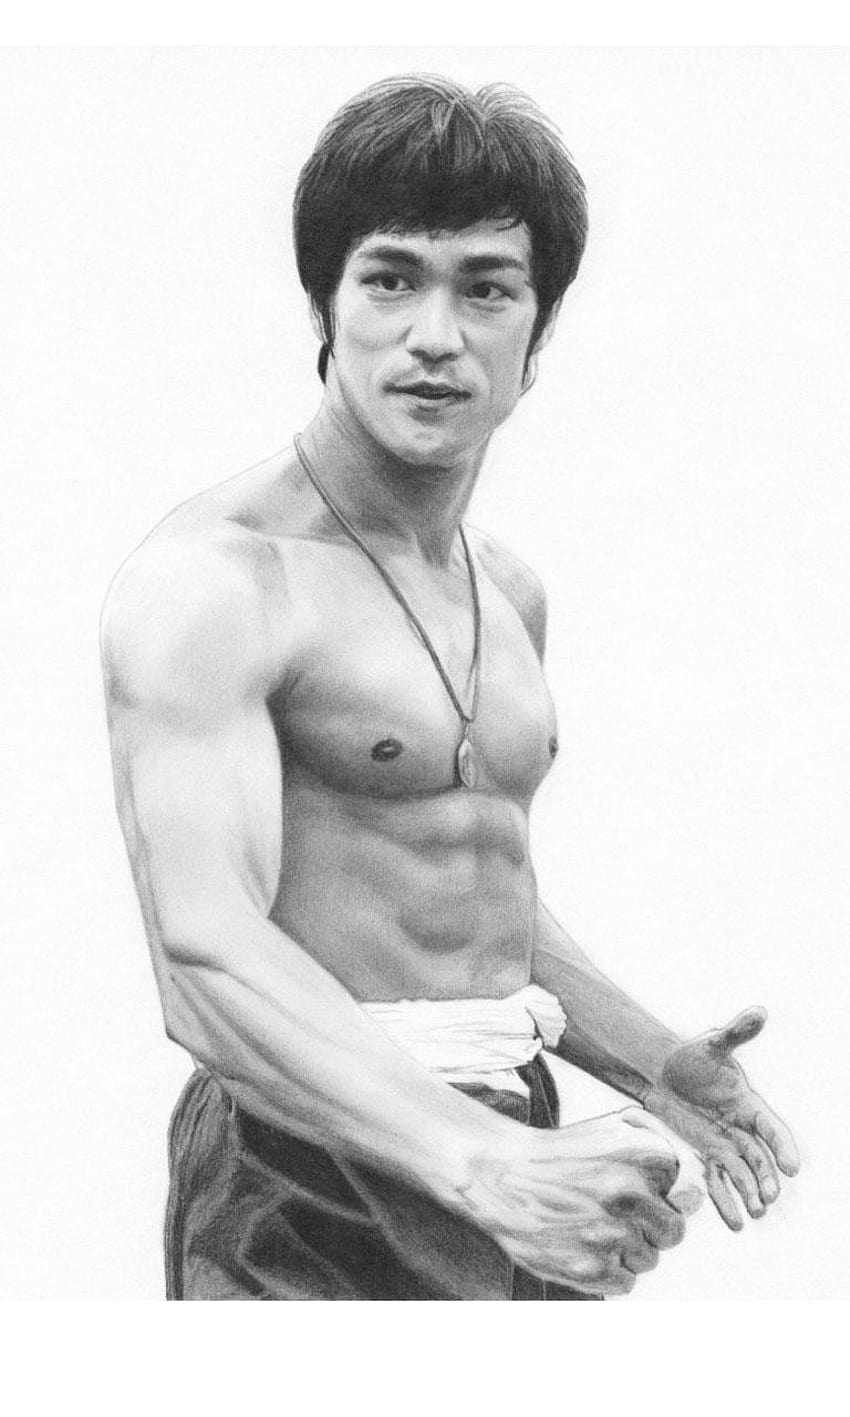 Bruce Lee for Android, bruce lee body HD phone wallpaper